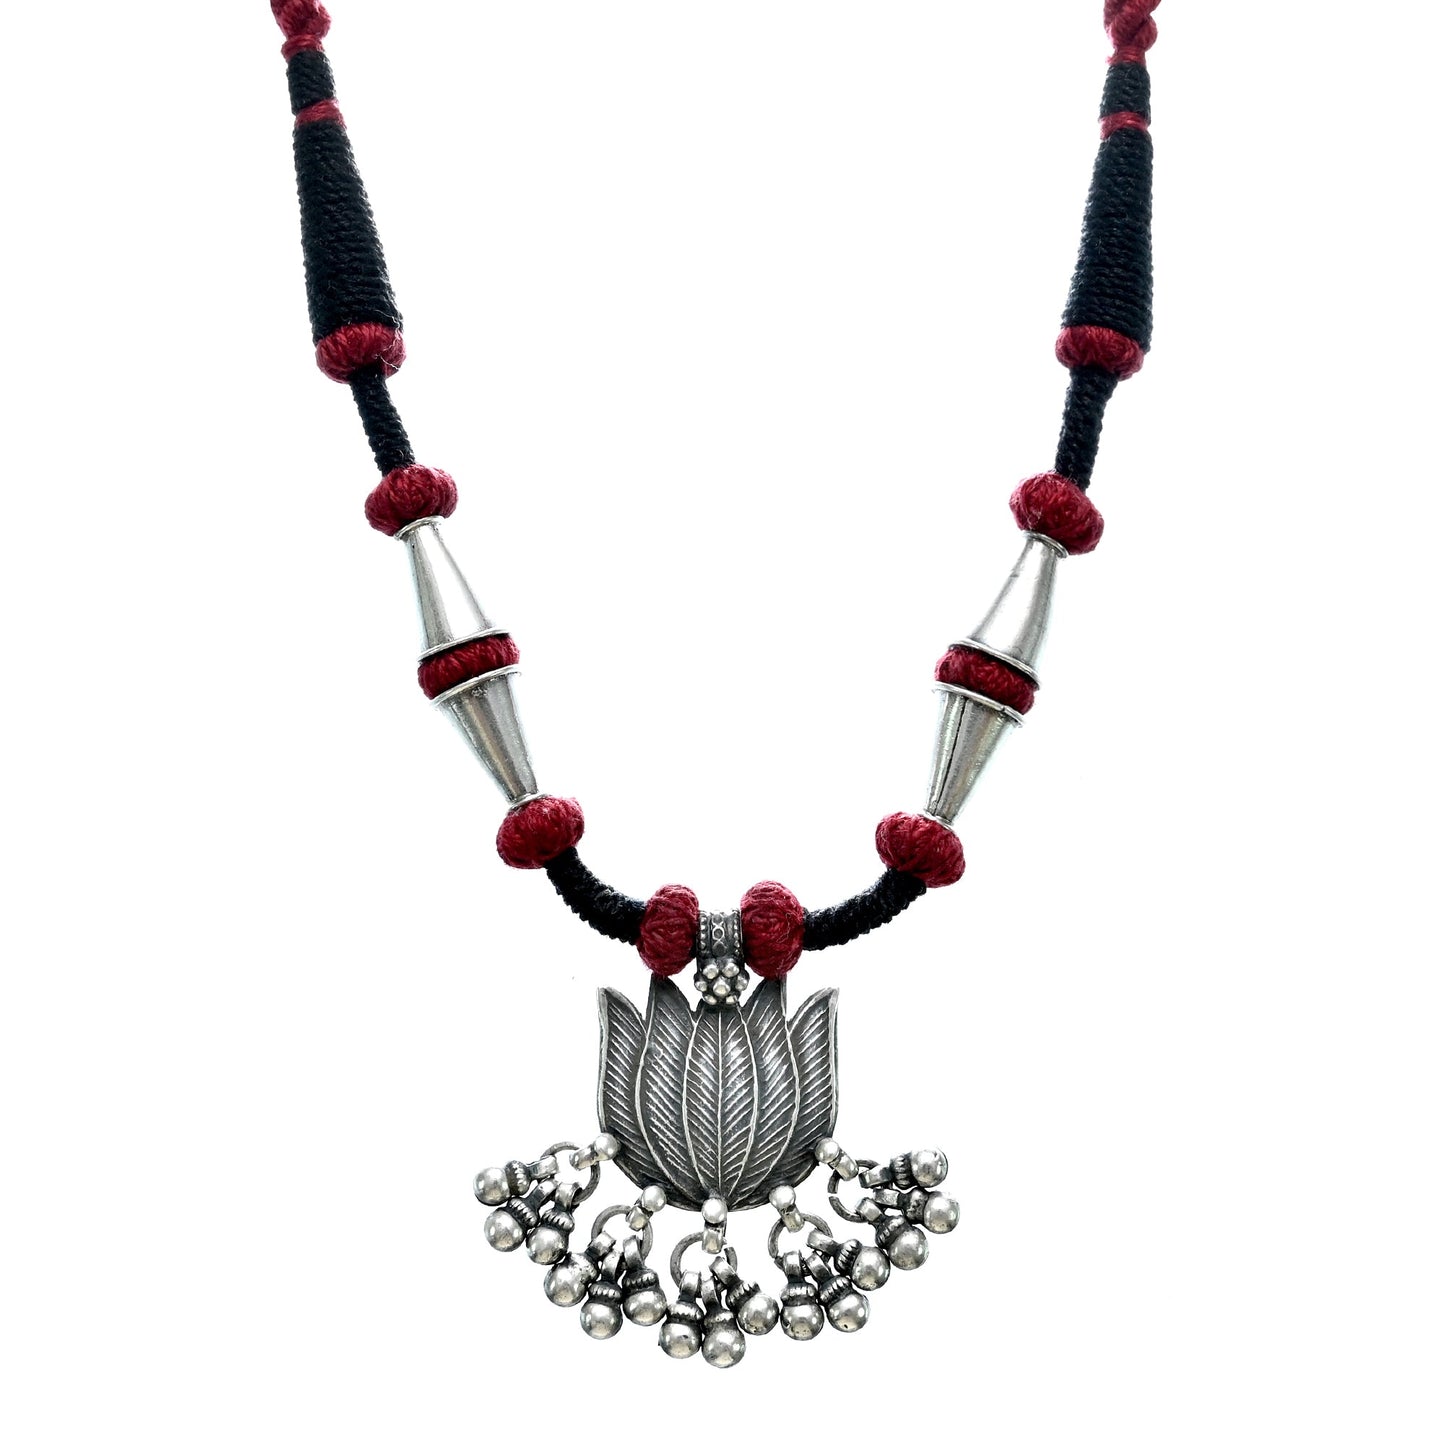 Silver Tribal Lotus Pendant Necklace with Multiple Silver Spacer Beads